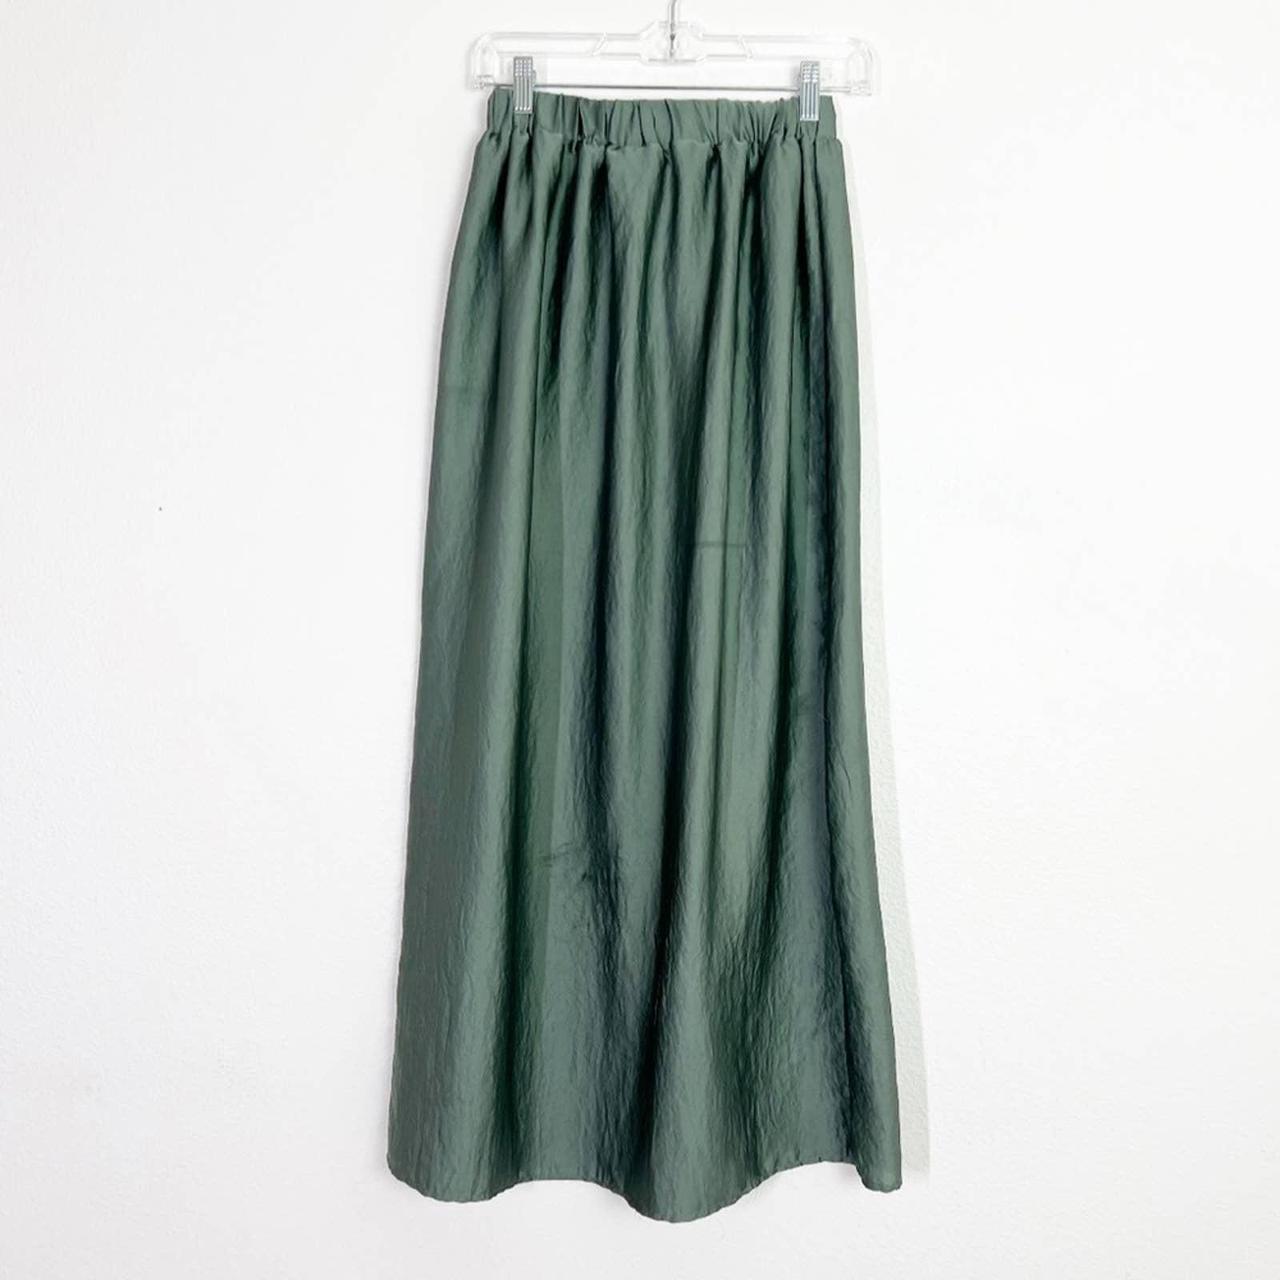 Y2K Mossimo sage green satin maxi skirt with elastic... - Depop